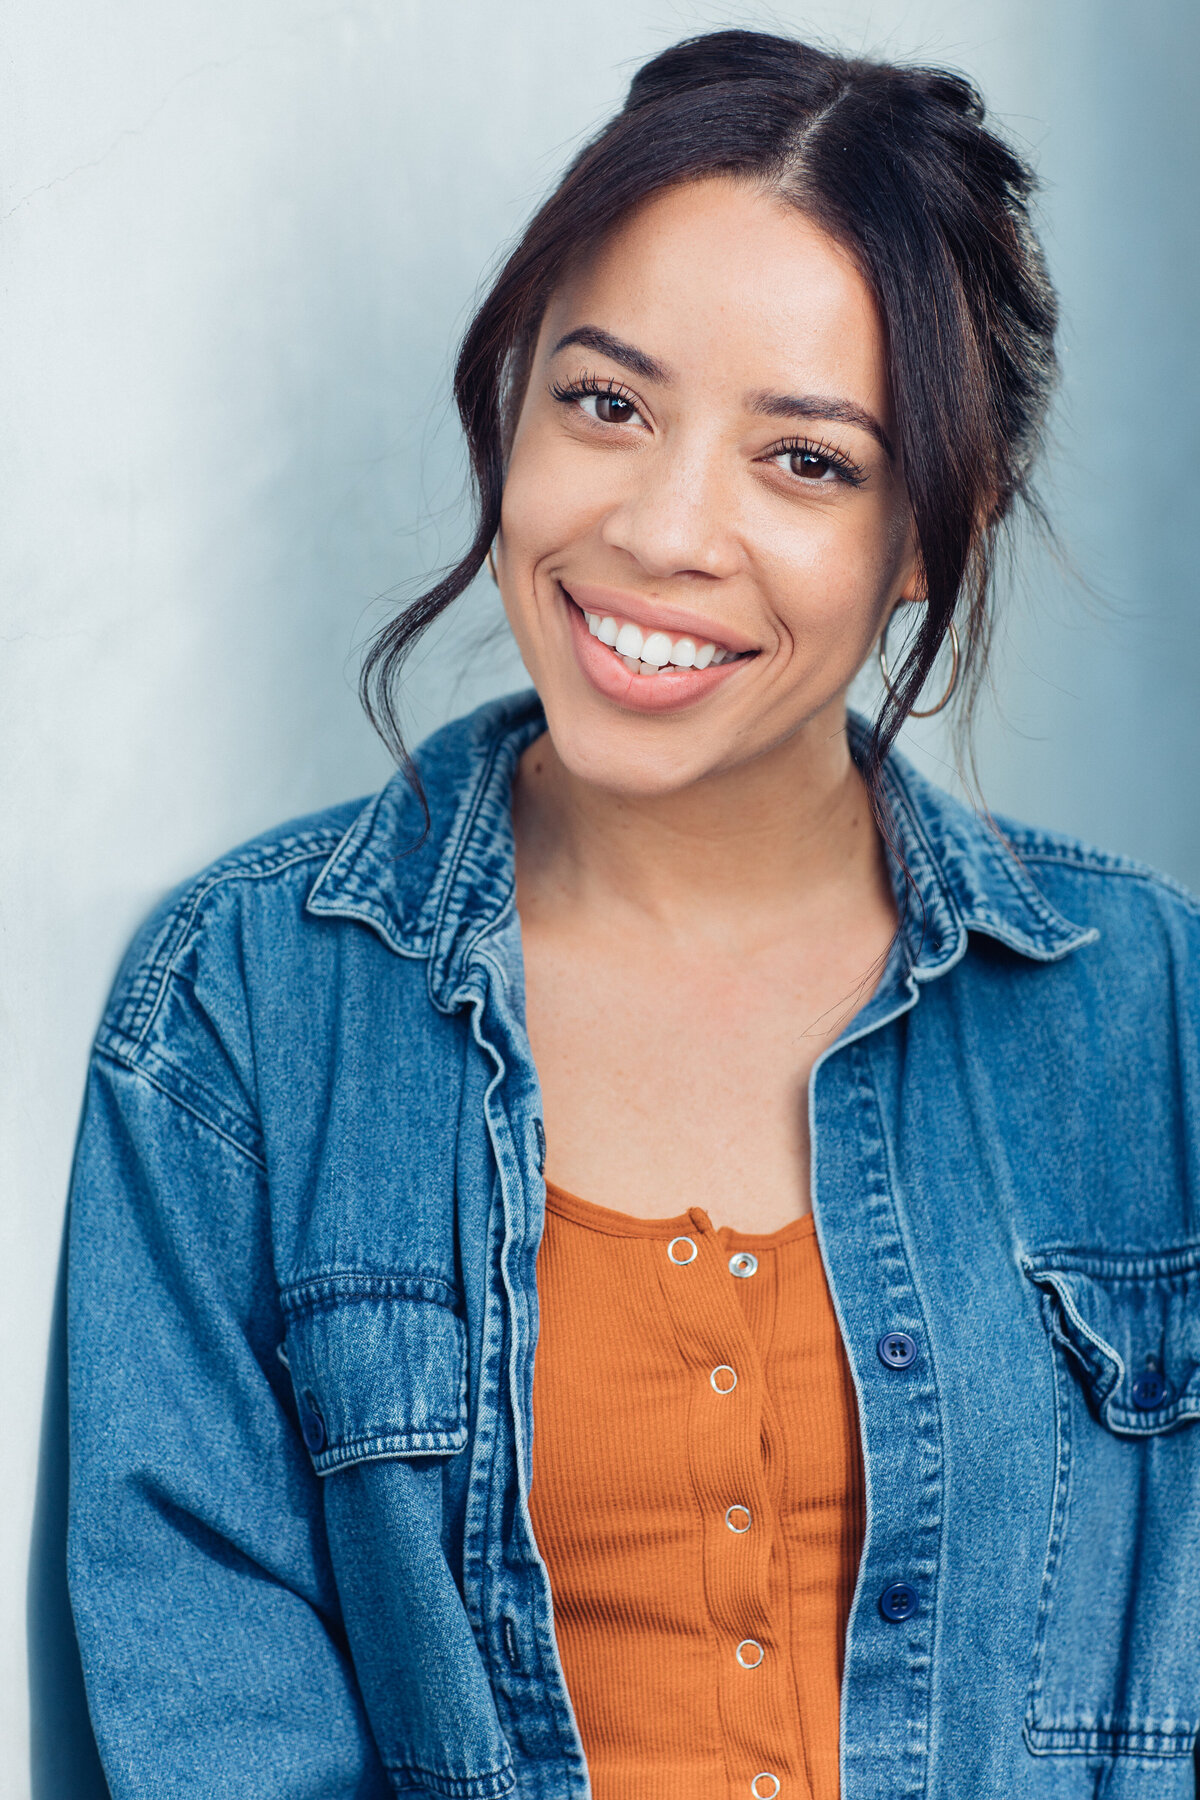 Headshot Photograph Of Young Woman In Outer Blue Denim Jacket And Inner Orange Buttoned Shirt Los Angeles